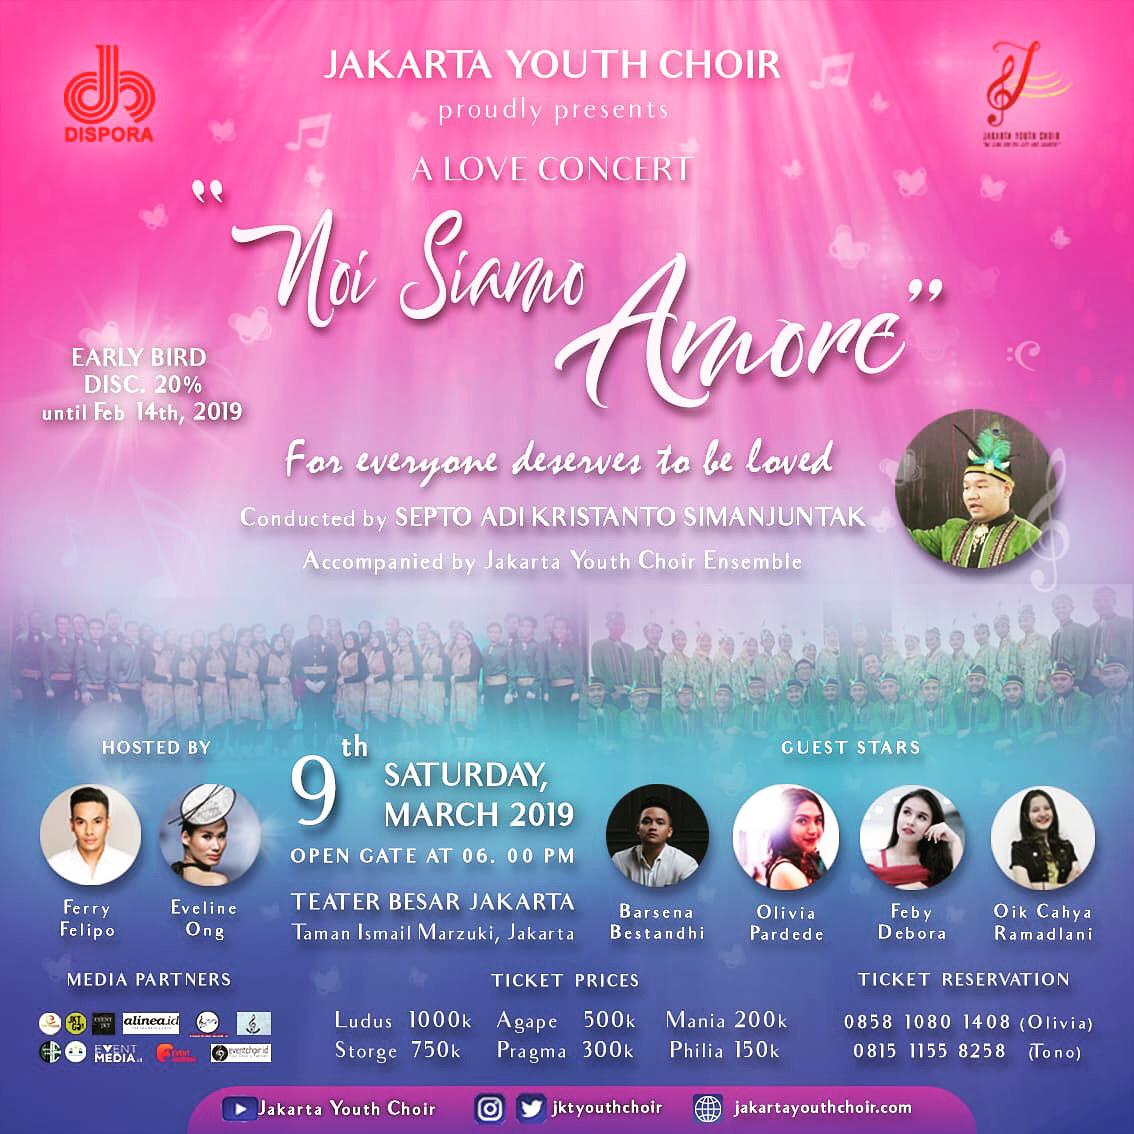 The Love Concert by Jakarta Youth Choir